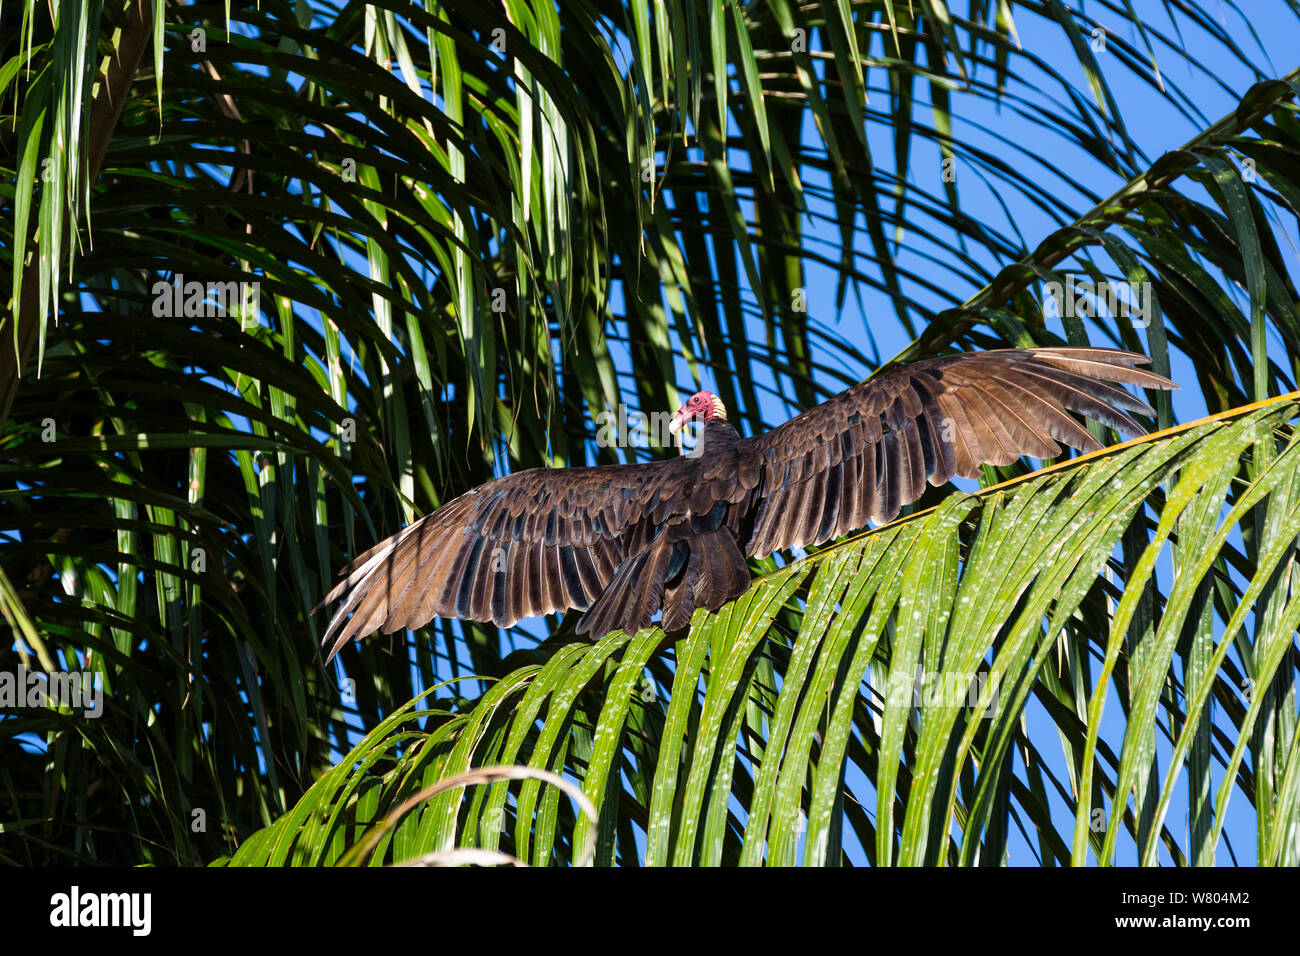 Turkey vulture (Cathartes aura) with wings outstreched in palm tree, Panguana Reserve, Huanuco province, Amazon basin, Peru. Stock Photo